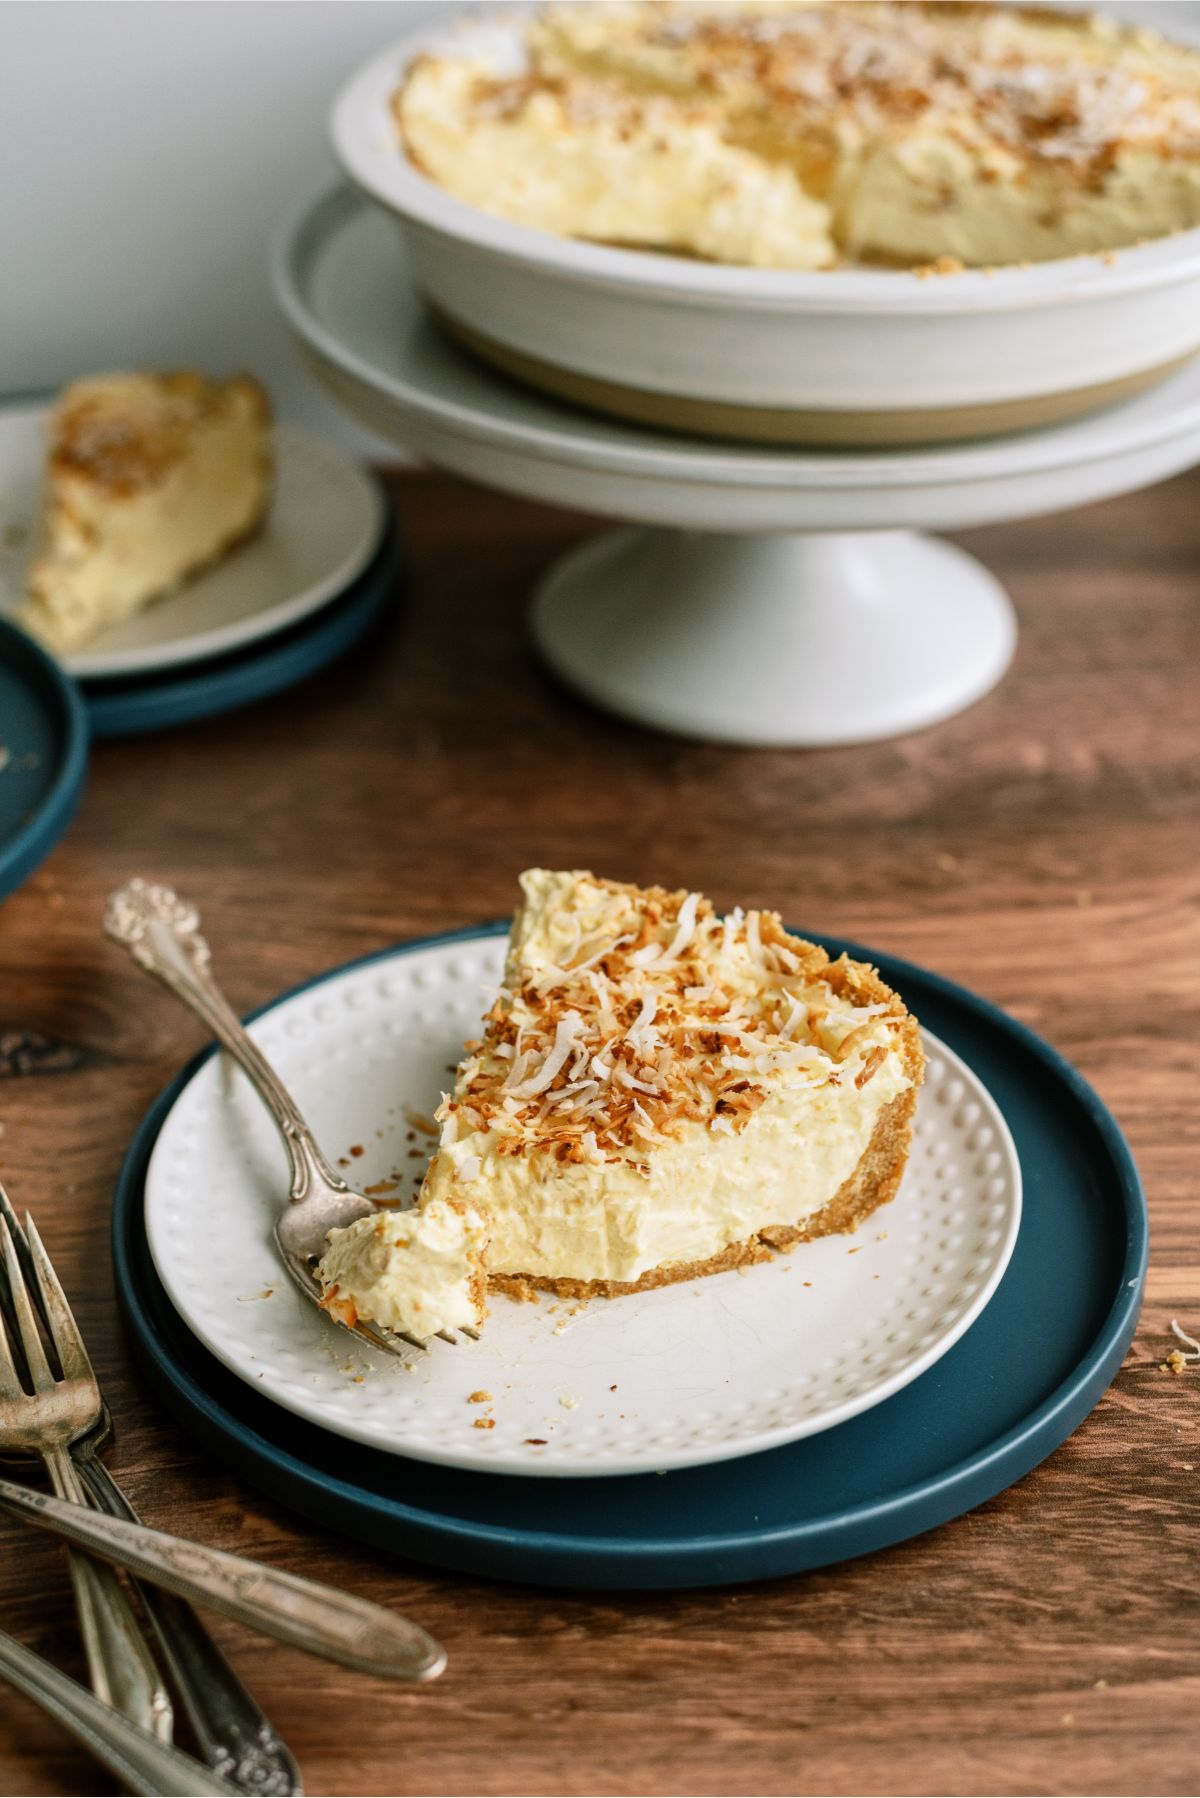 A slice of No Bake Coconut Cream Pie on a plate with a fork